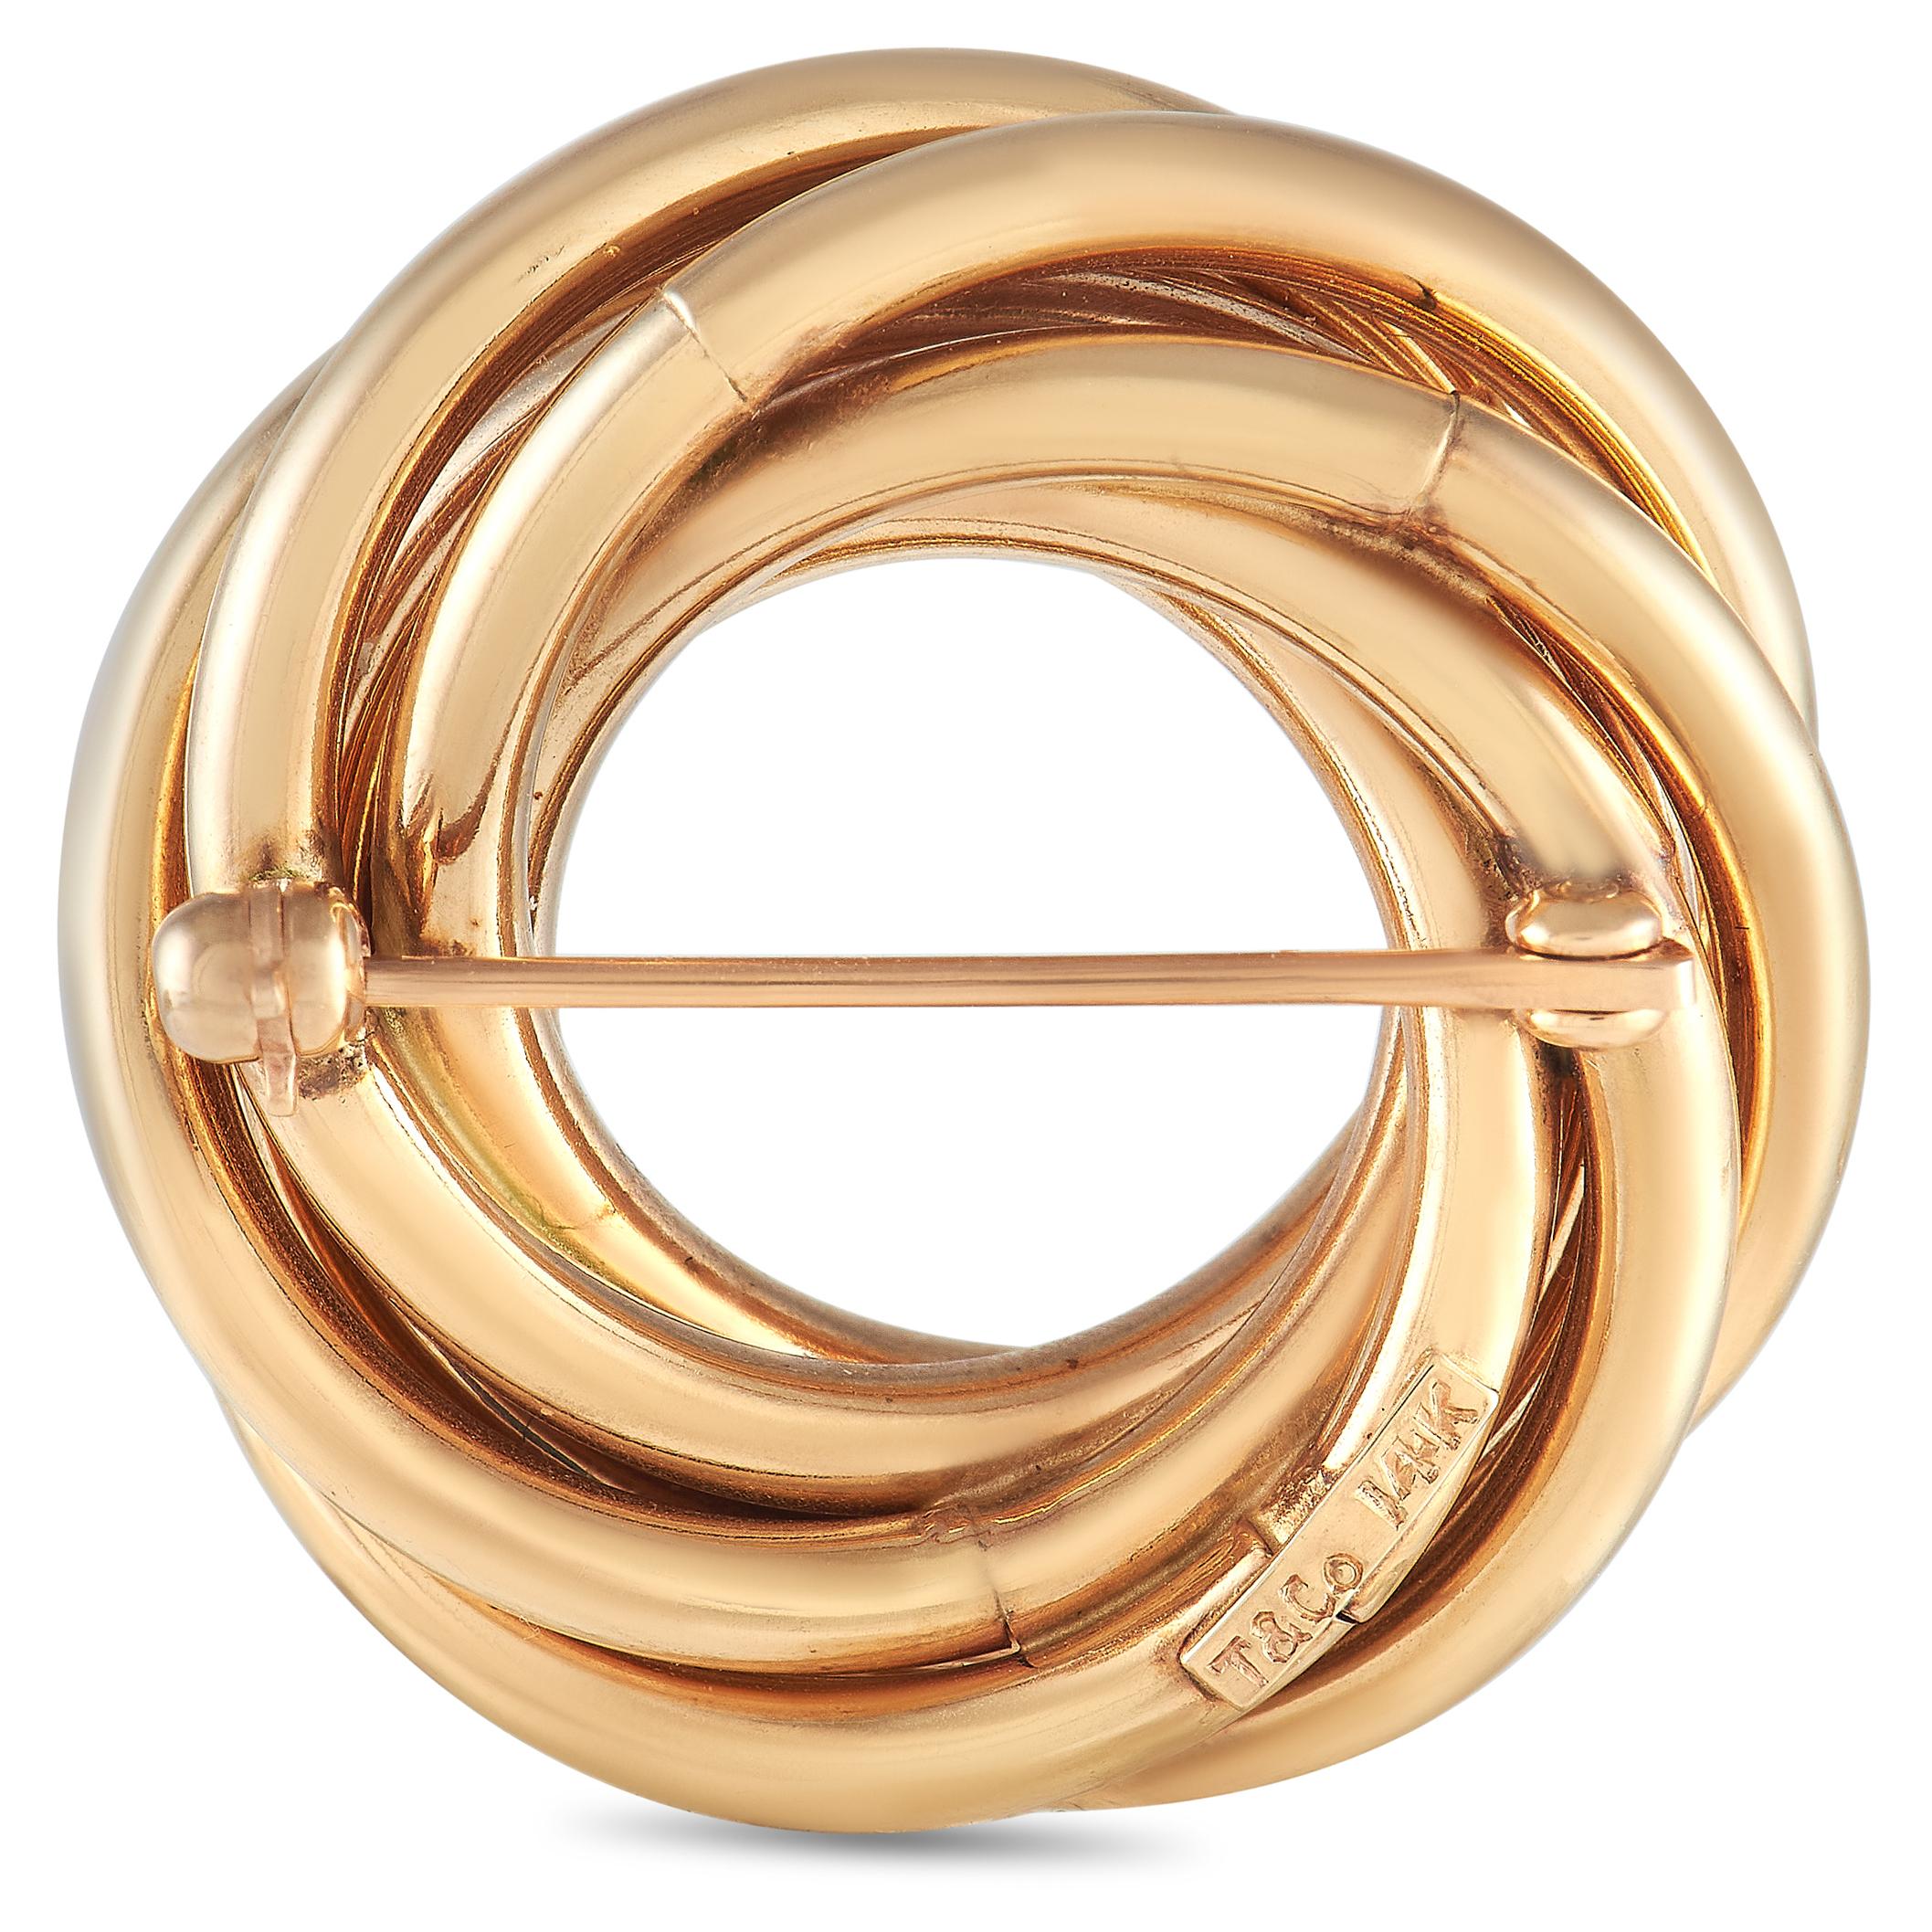 Add an elegant adornment to your dressy outfits in the form of this golden brooch from Tiffany & Co. This versatile accessory features a spiral ring shape in polished 18K yellow gold. Count on this classy piece to bring a touch of of unexpected